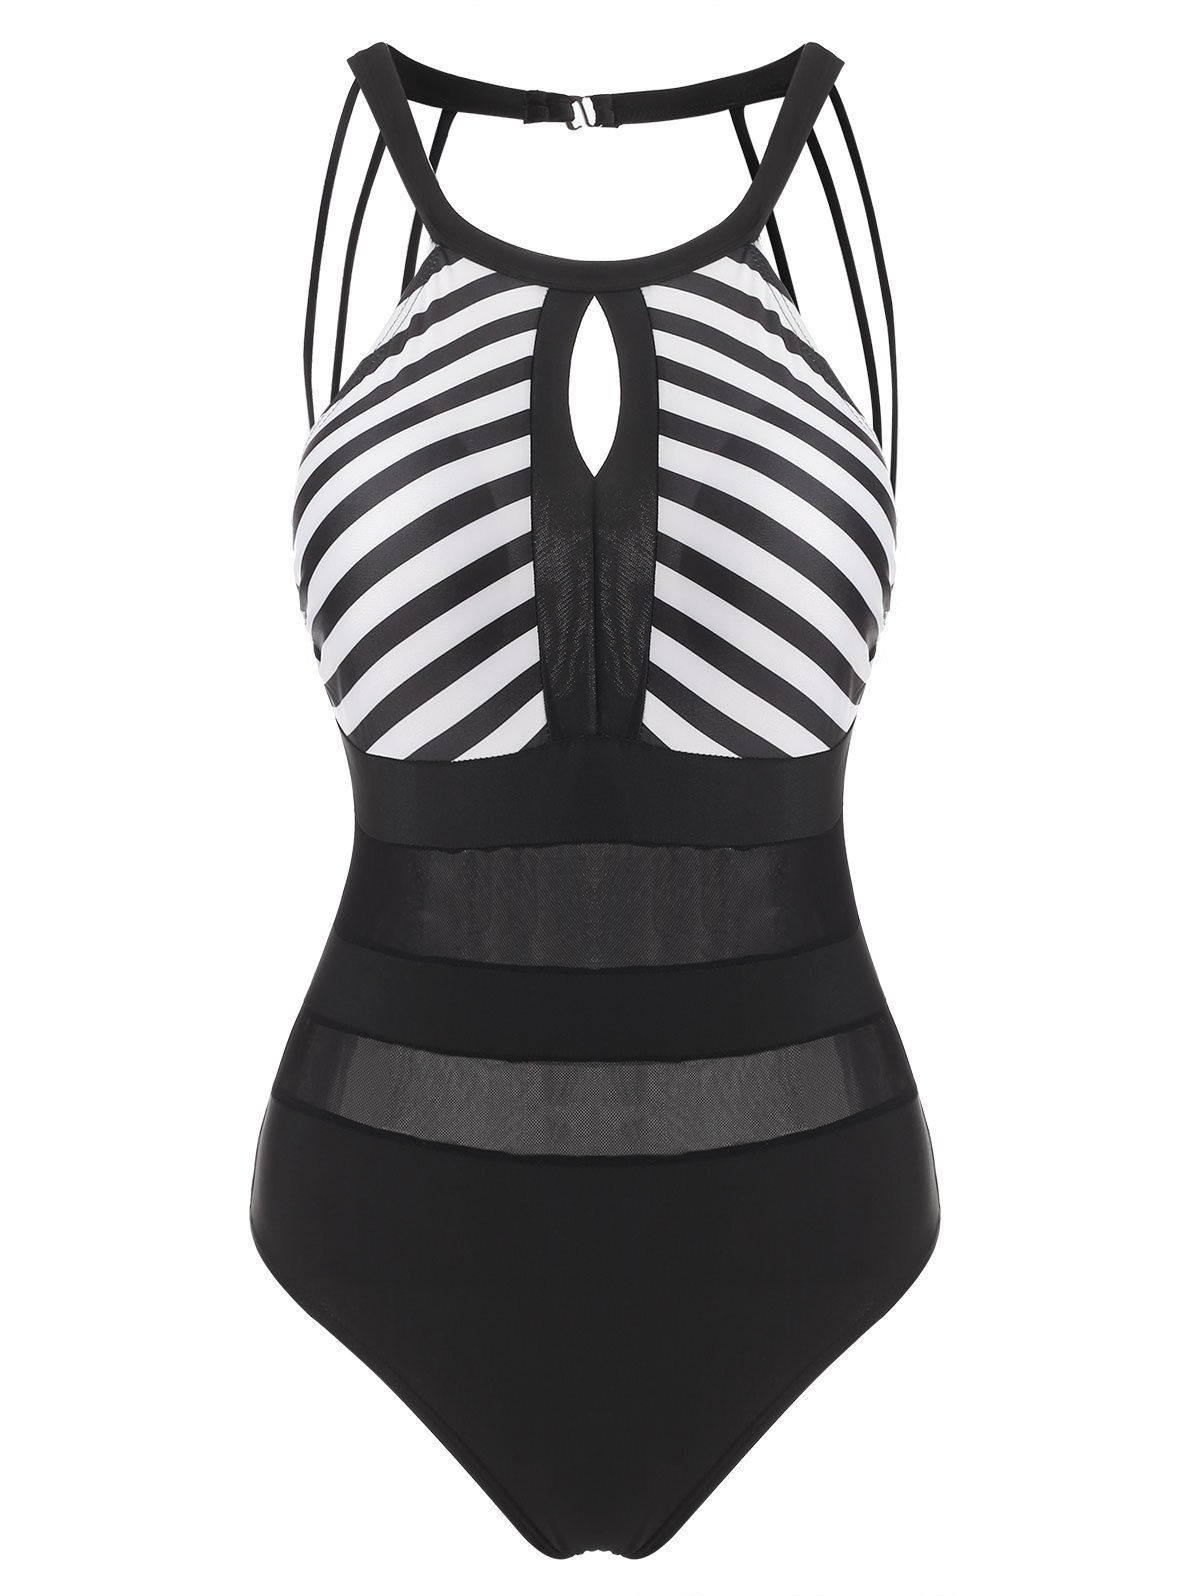 Striped Mesh Panel Keyhole Sheer One-piece Swimsuit - BLACK S